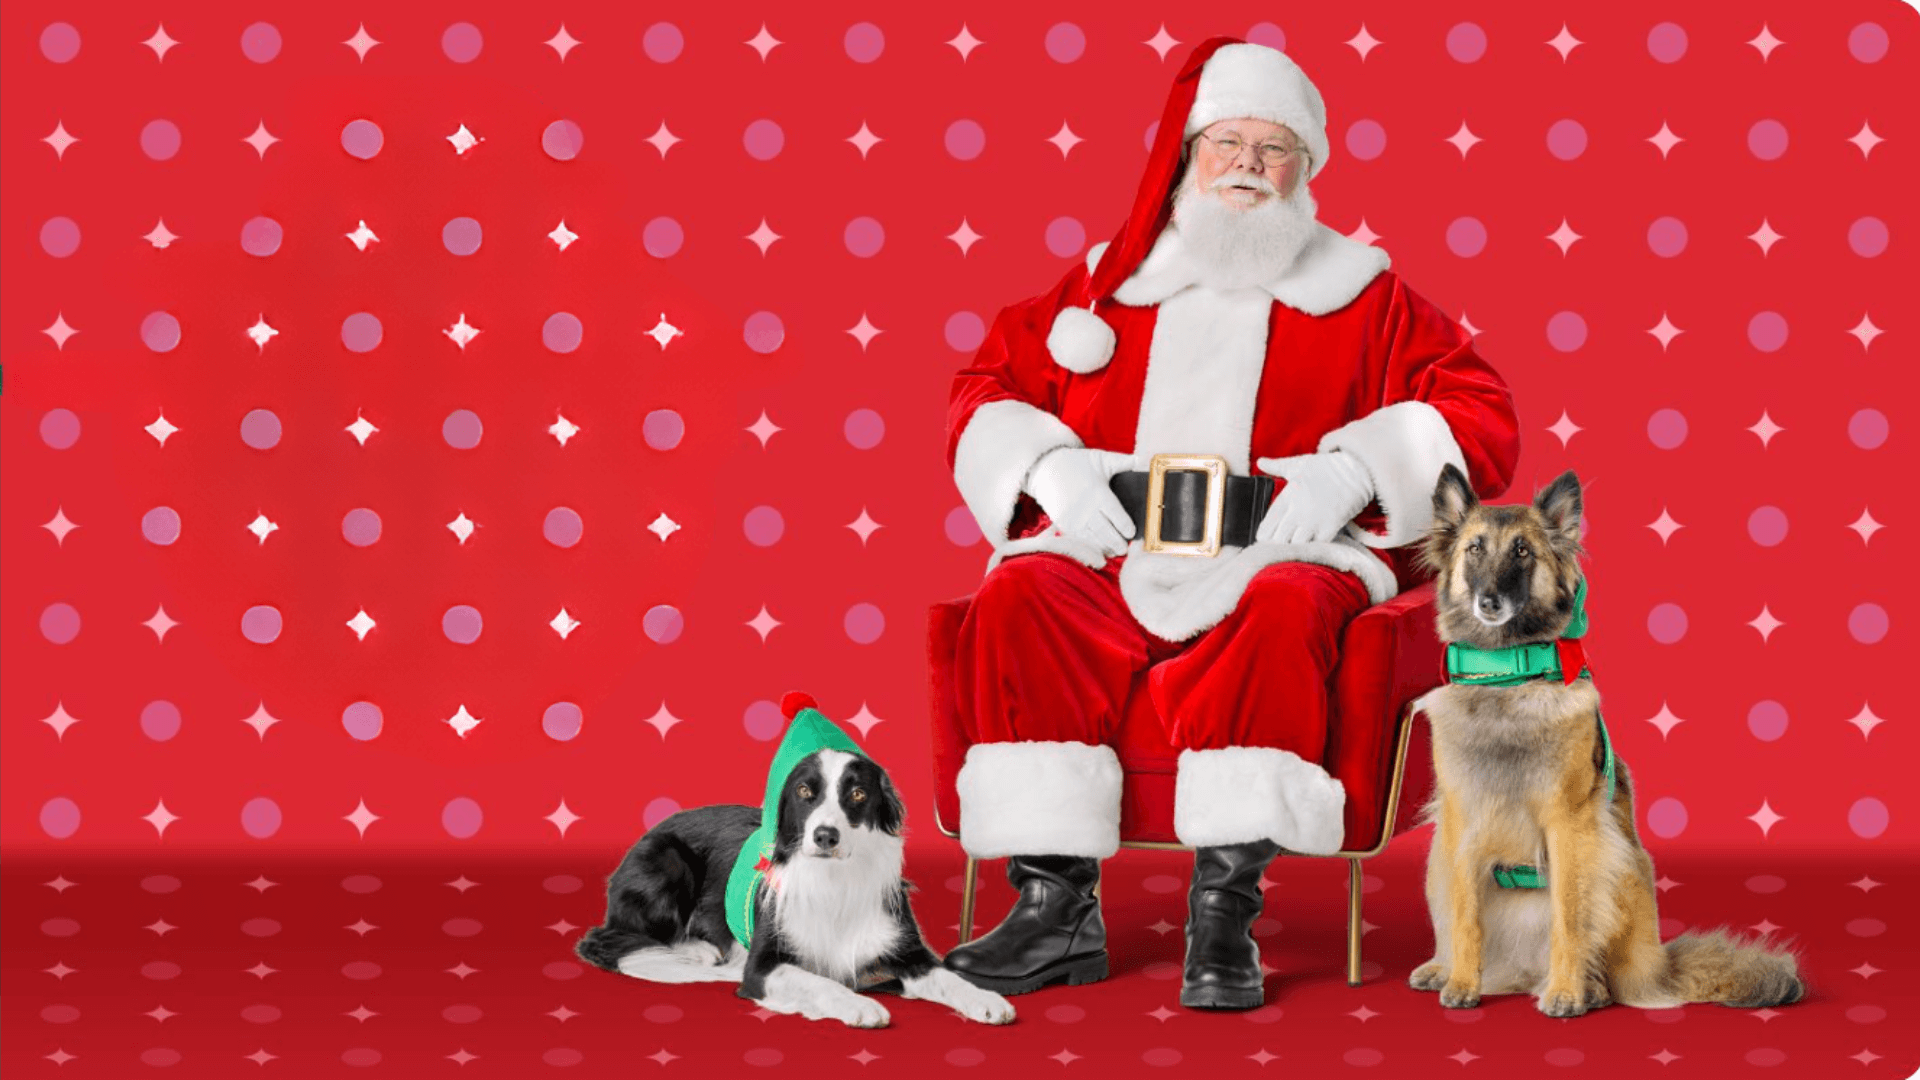 Holiday photo of Santa posing with two dogs.